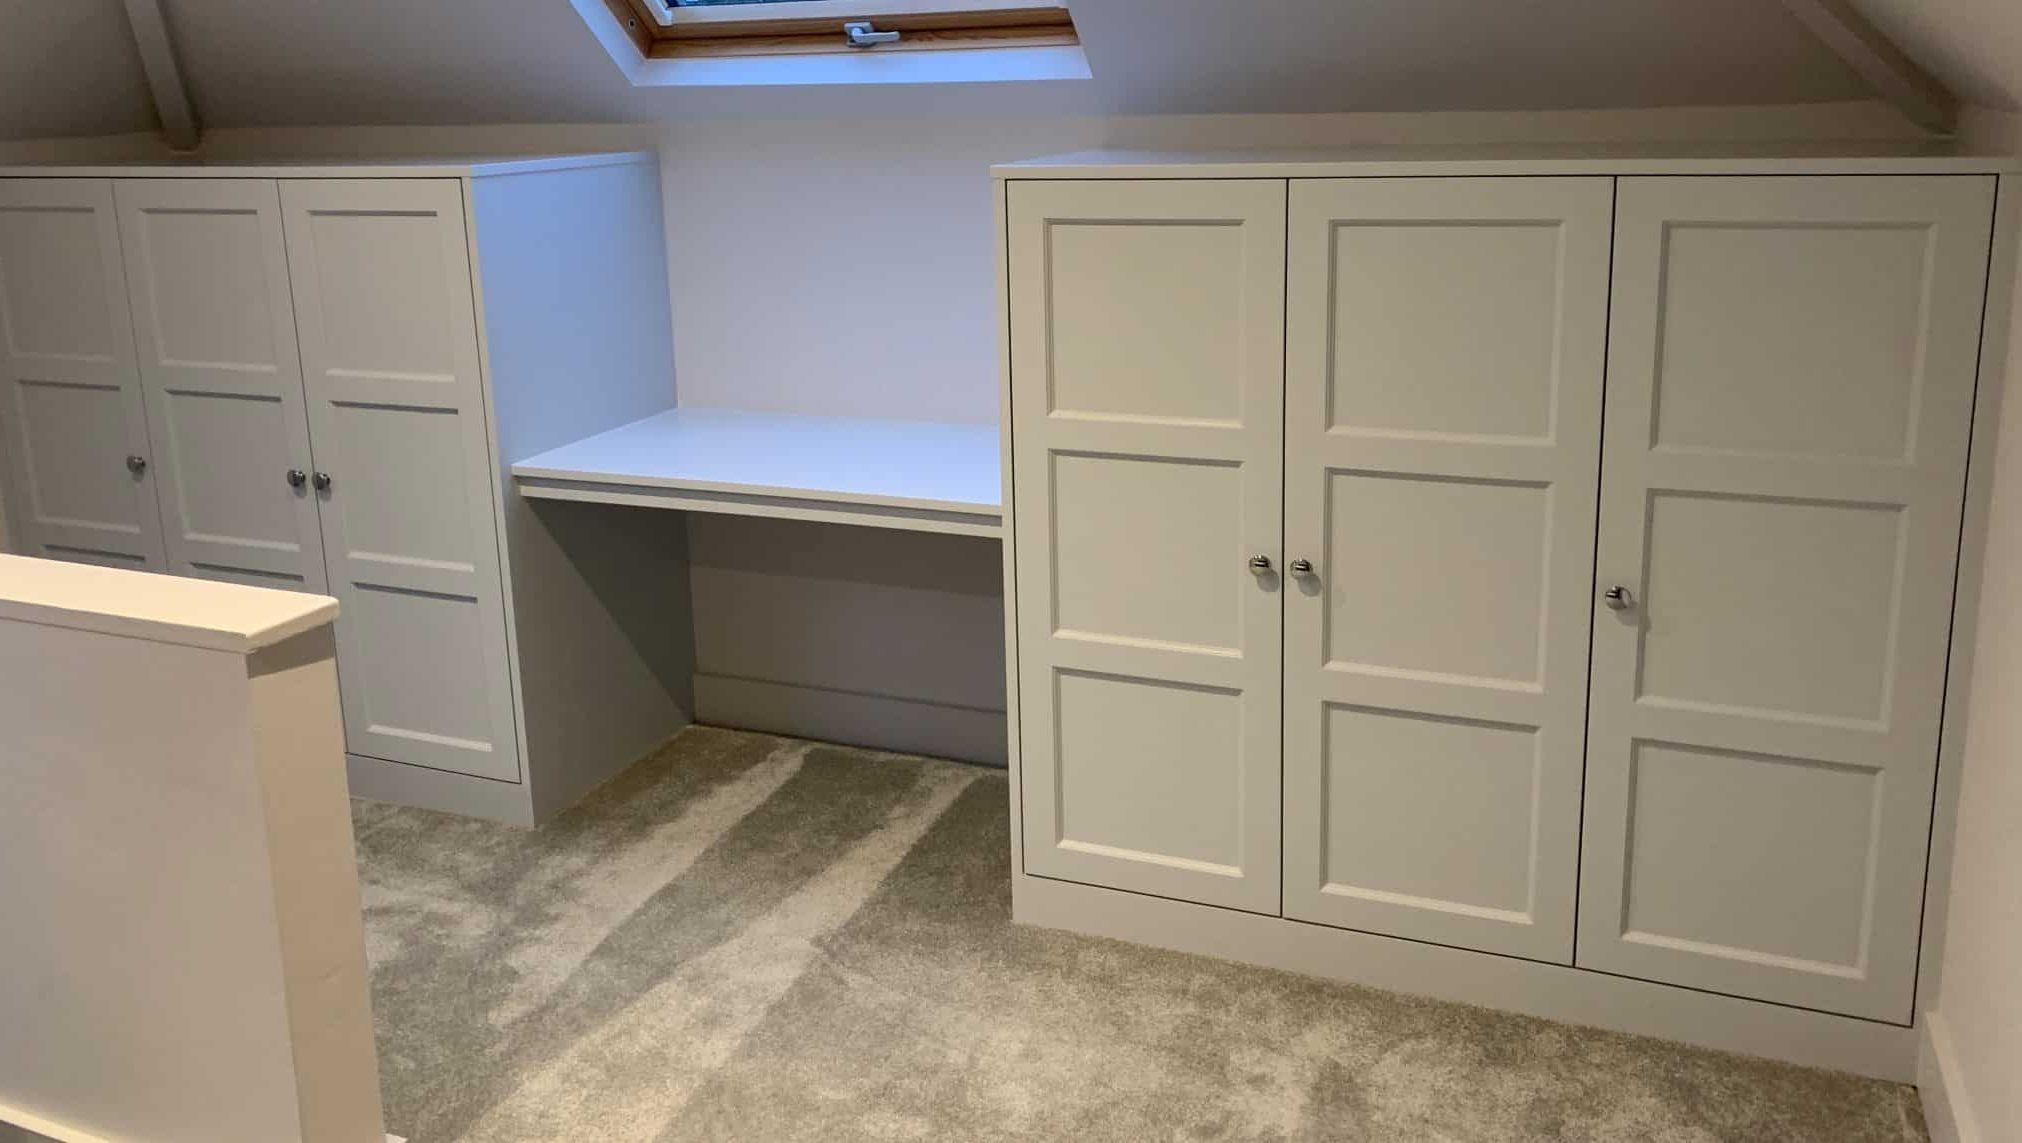 Low Ceiling Attic Wardrobes | Fitted Wardrobes For Sloping Ceilings With Regard To Short Wardrobes (View 12 of 20)